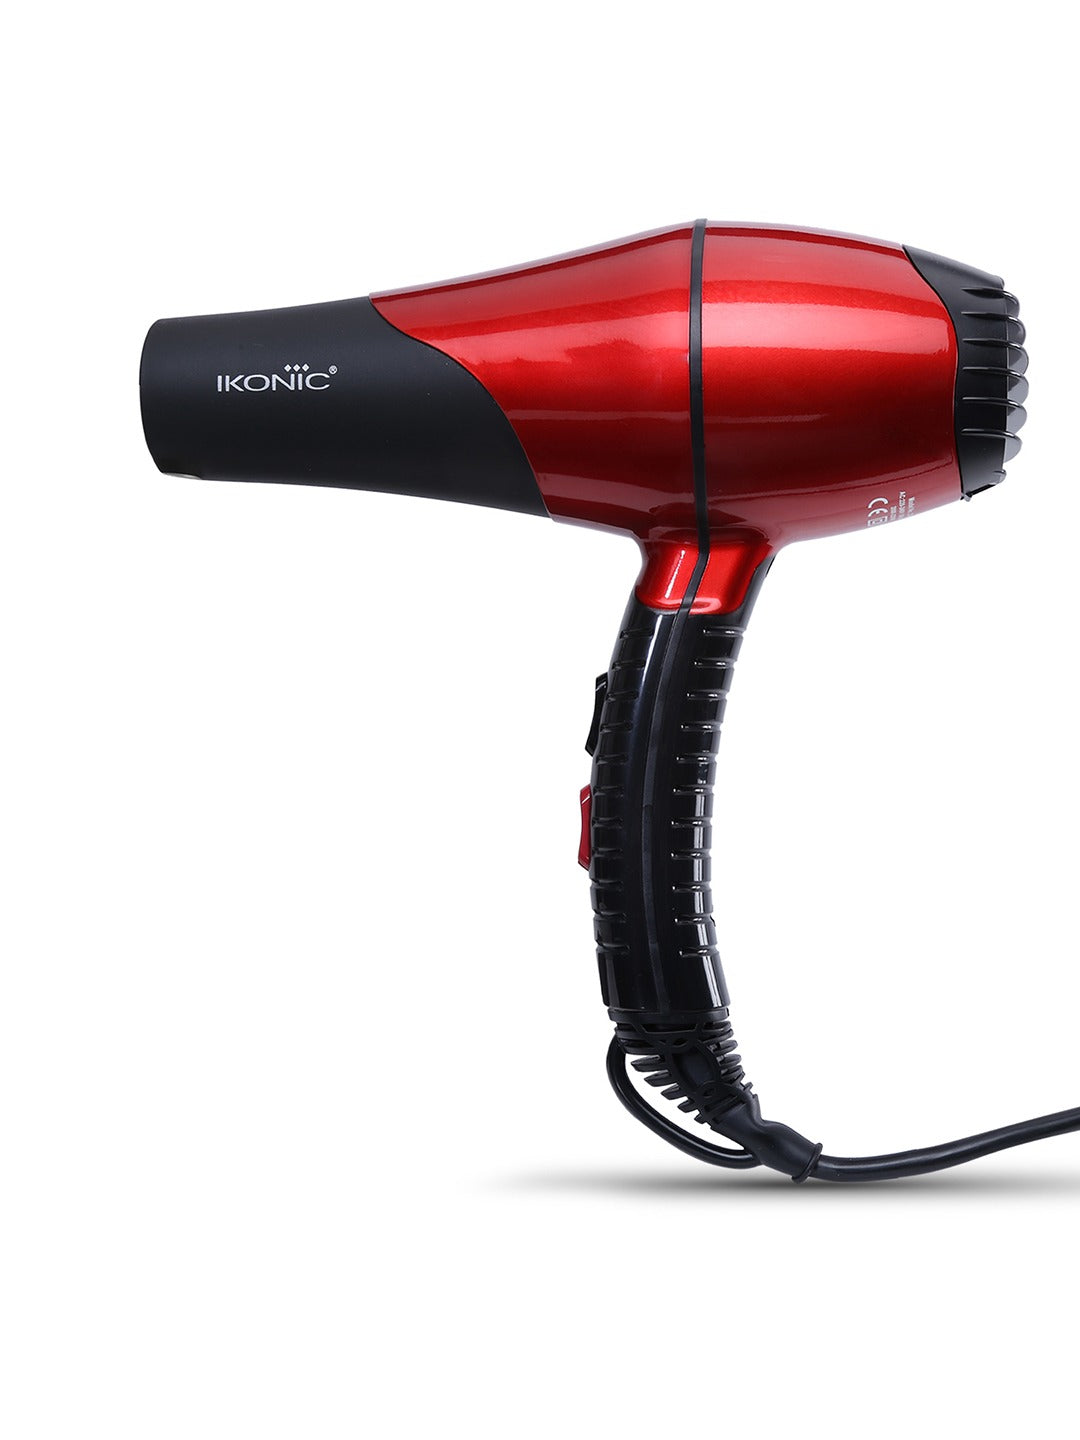 Ikonic PRO 2200 Red & Black Hair Dryer to blow dry hair – Cloud Sell Online